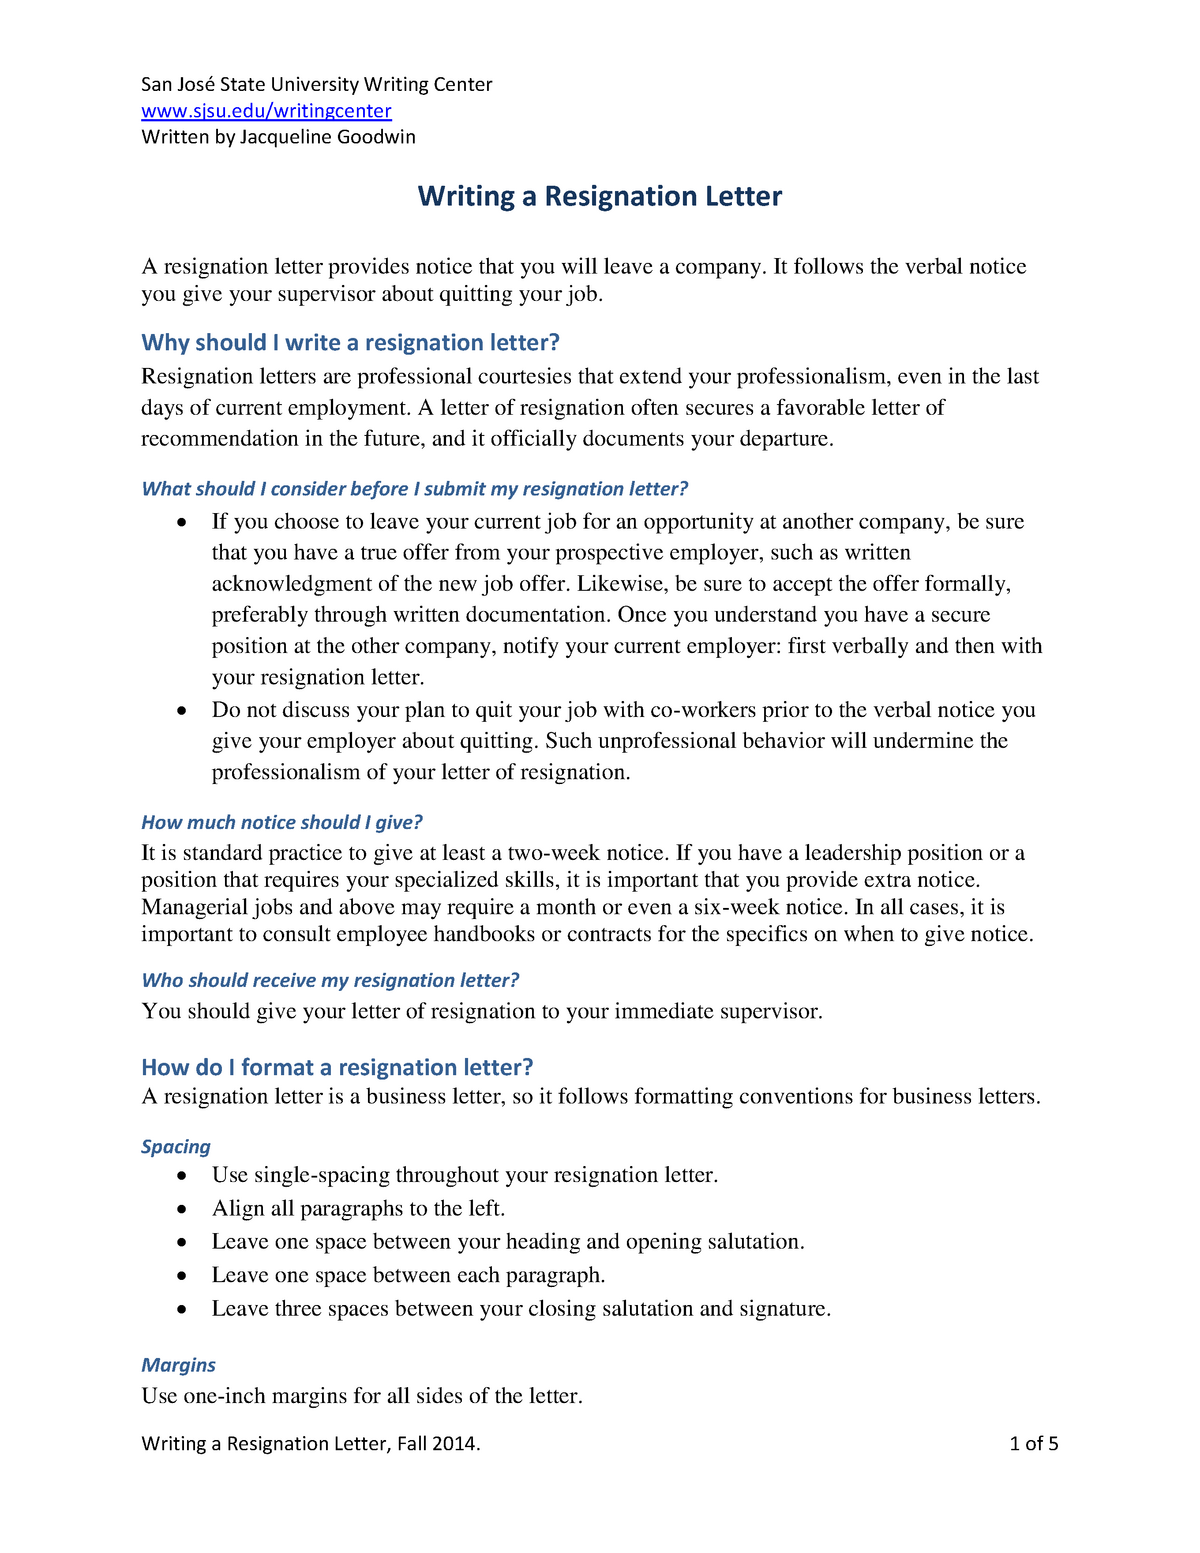 Resignation Letters-Sample-resignation-letter-LING 21 LANG OF THE